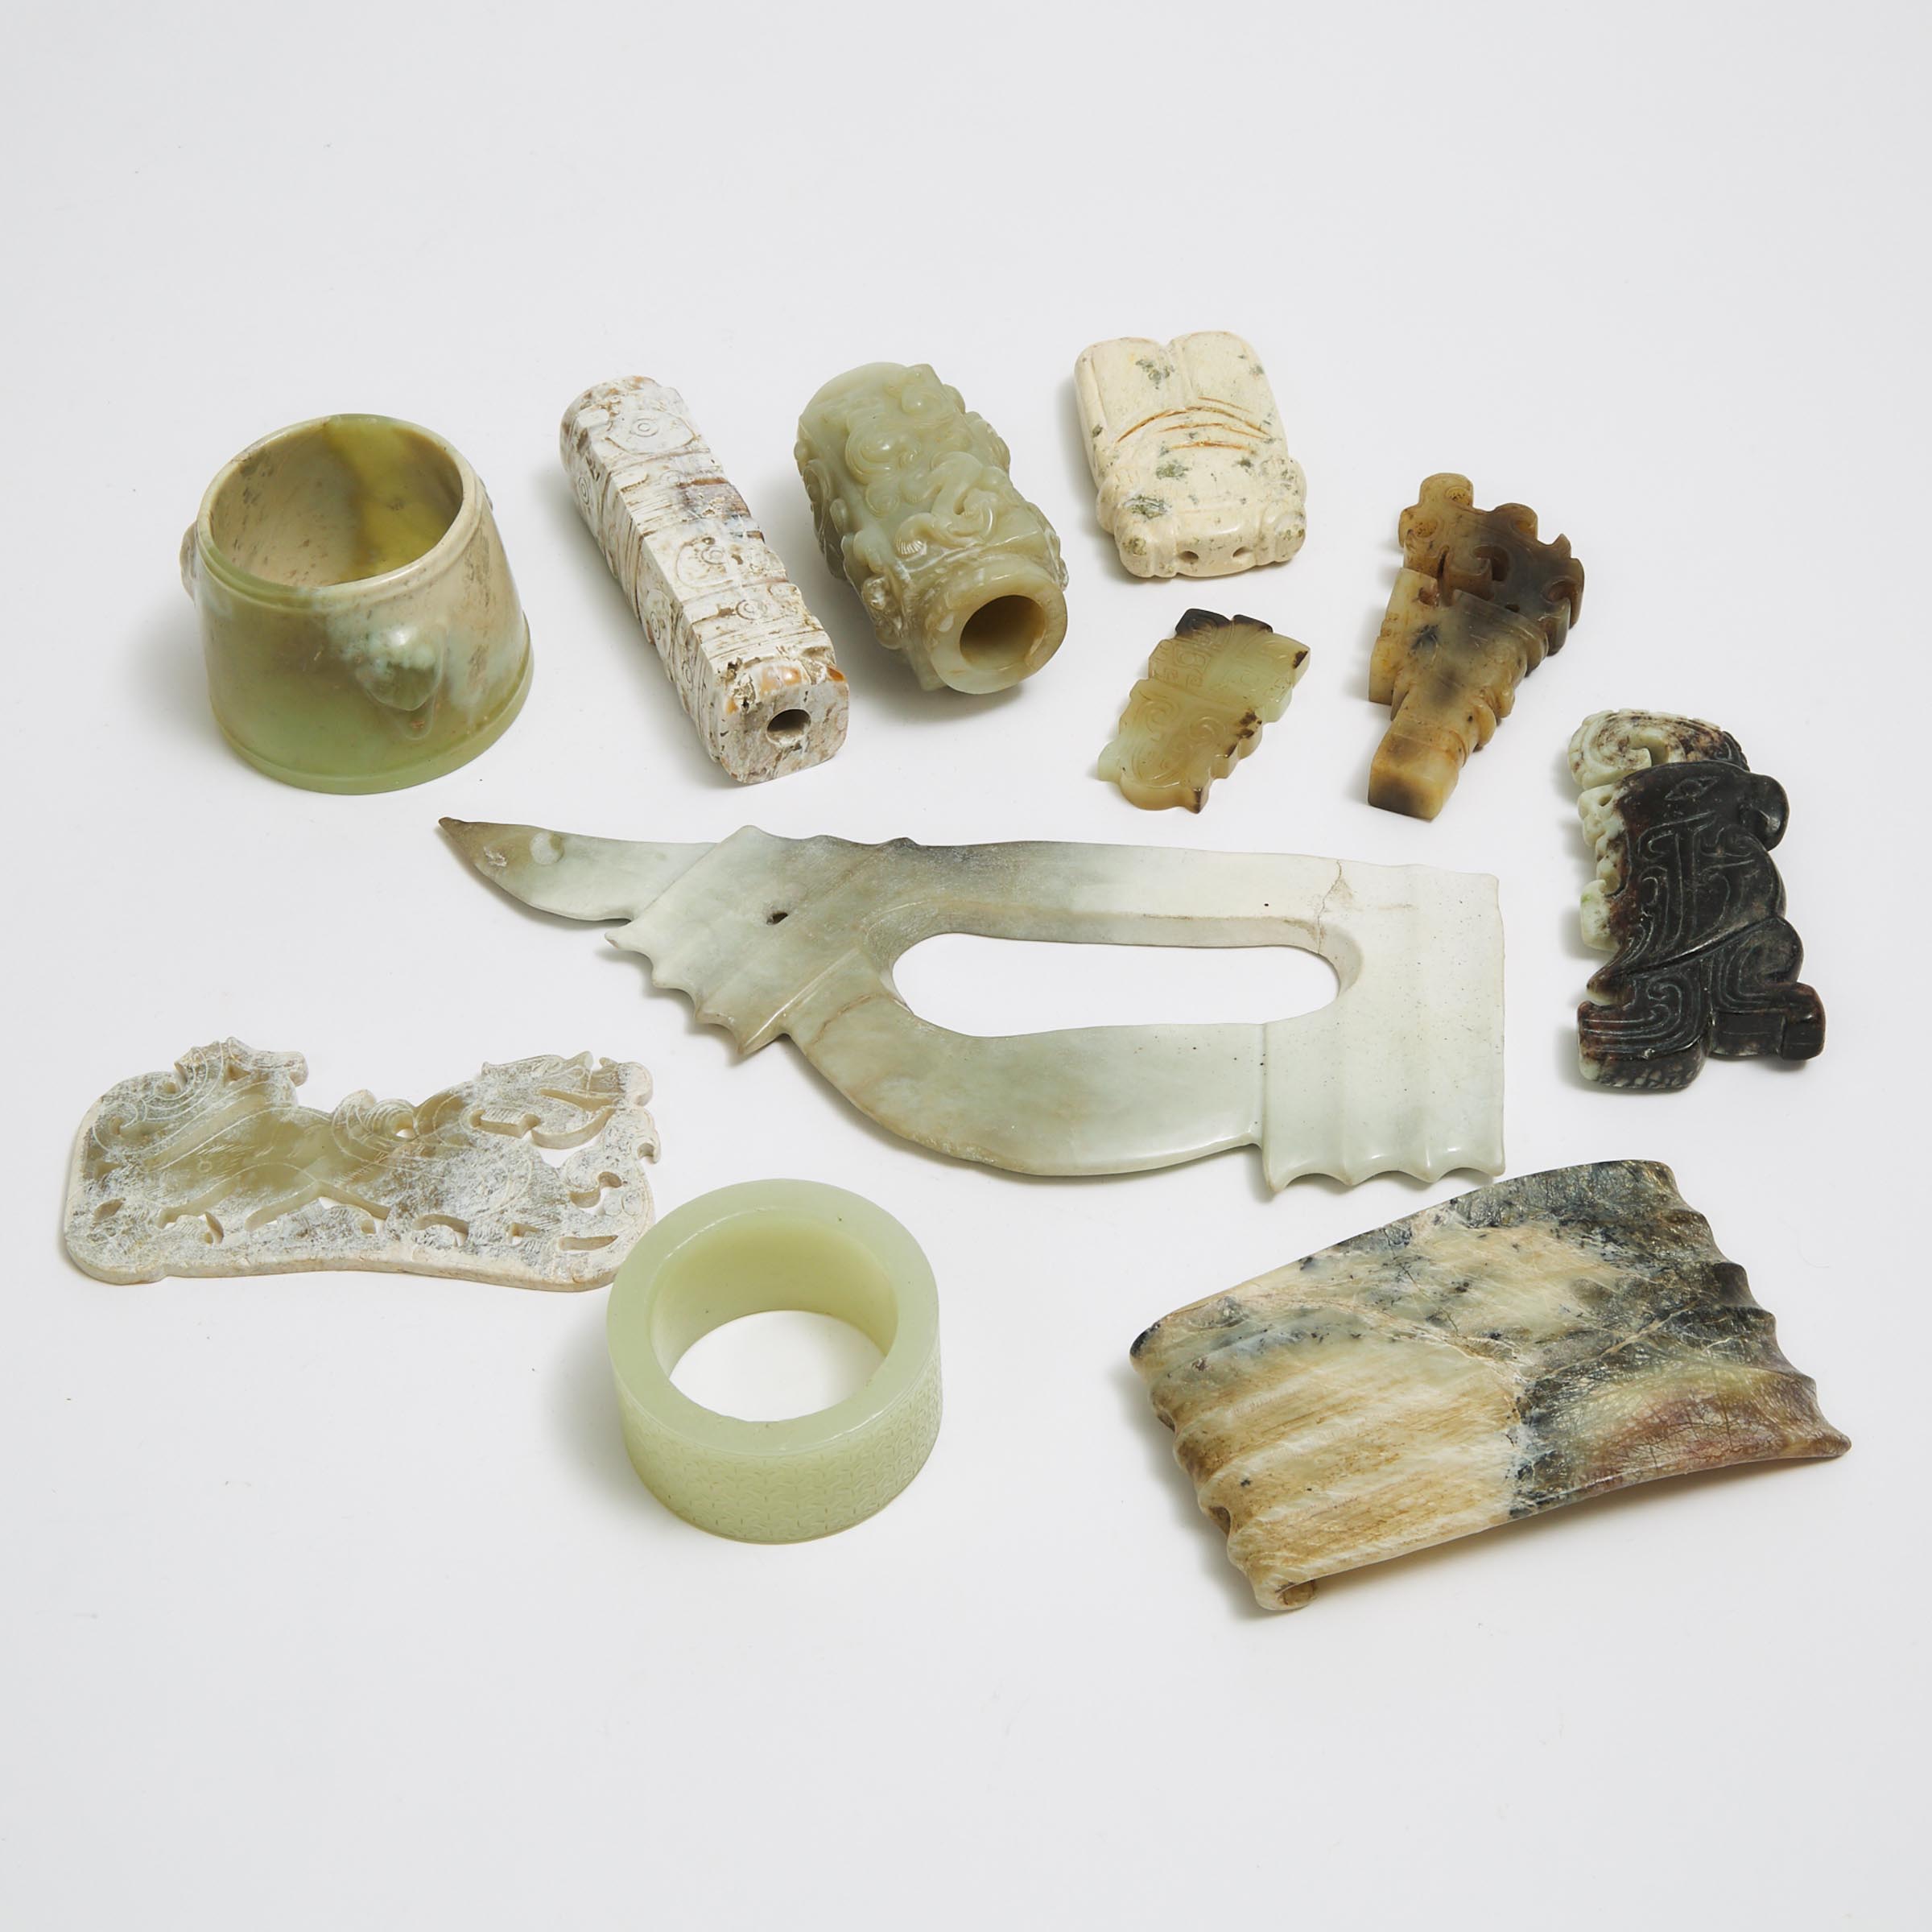 A Group of Eleven Chinese Archaic-Style Jade and Stone Carved Objects